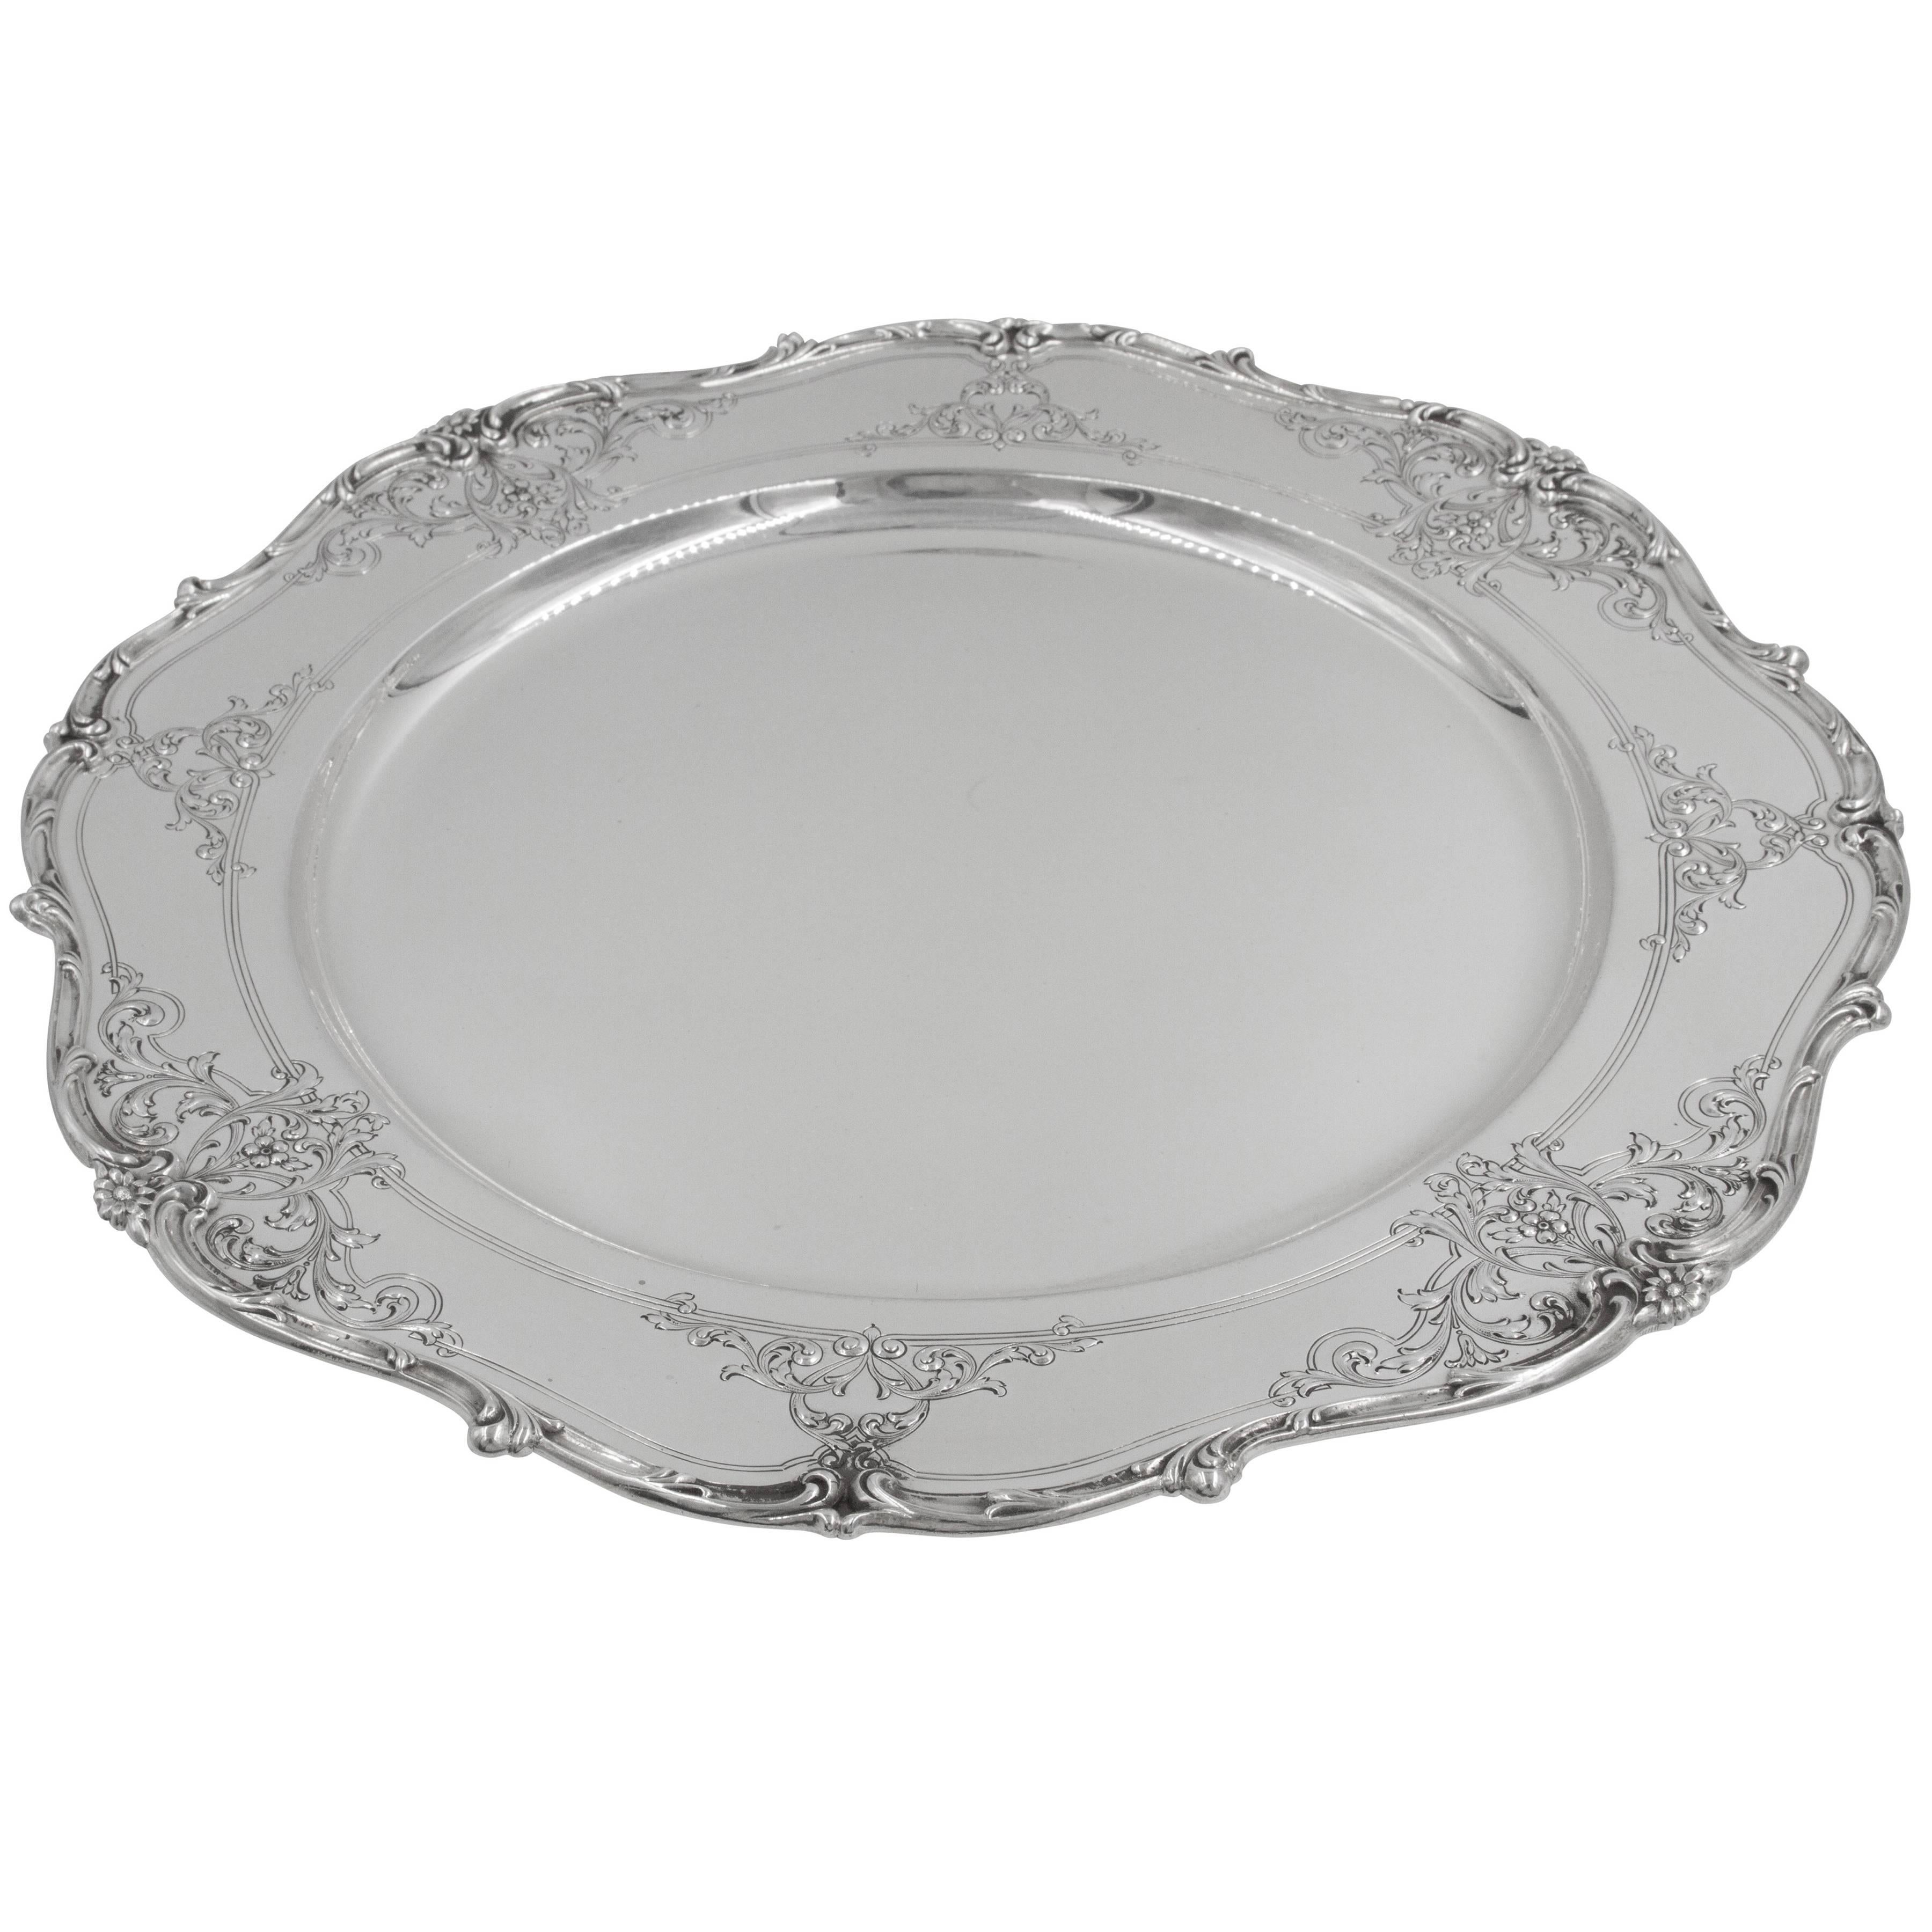 Before we describe this piece, let's take a moment to wish it a happy birthday it's now 101 years old! (And looking darn good too!) Delicate etching of flowers and vines grace the rim of this scalloped platter giving it a softer and old-world feel.